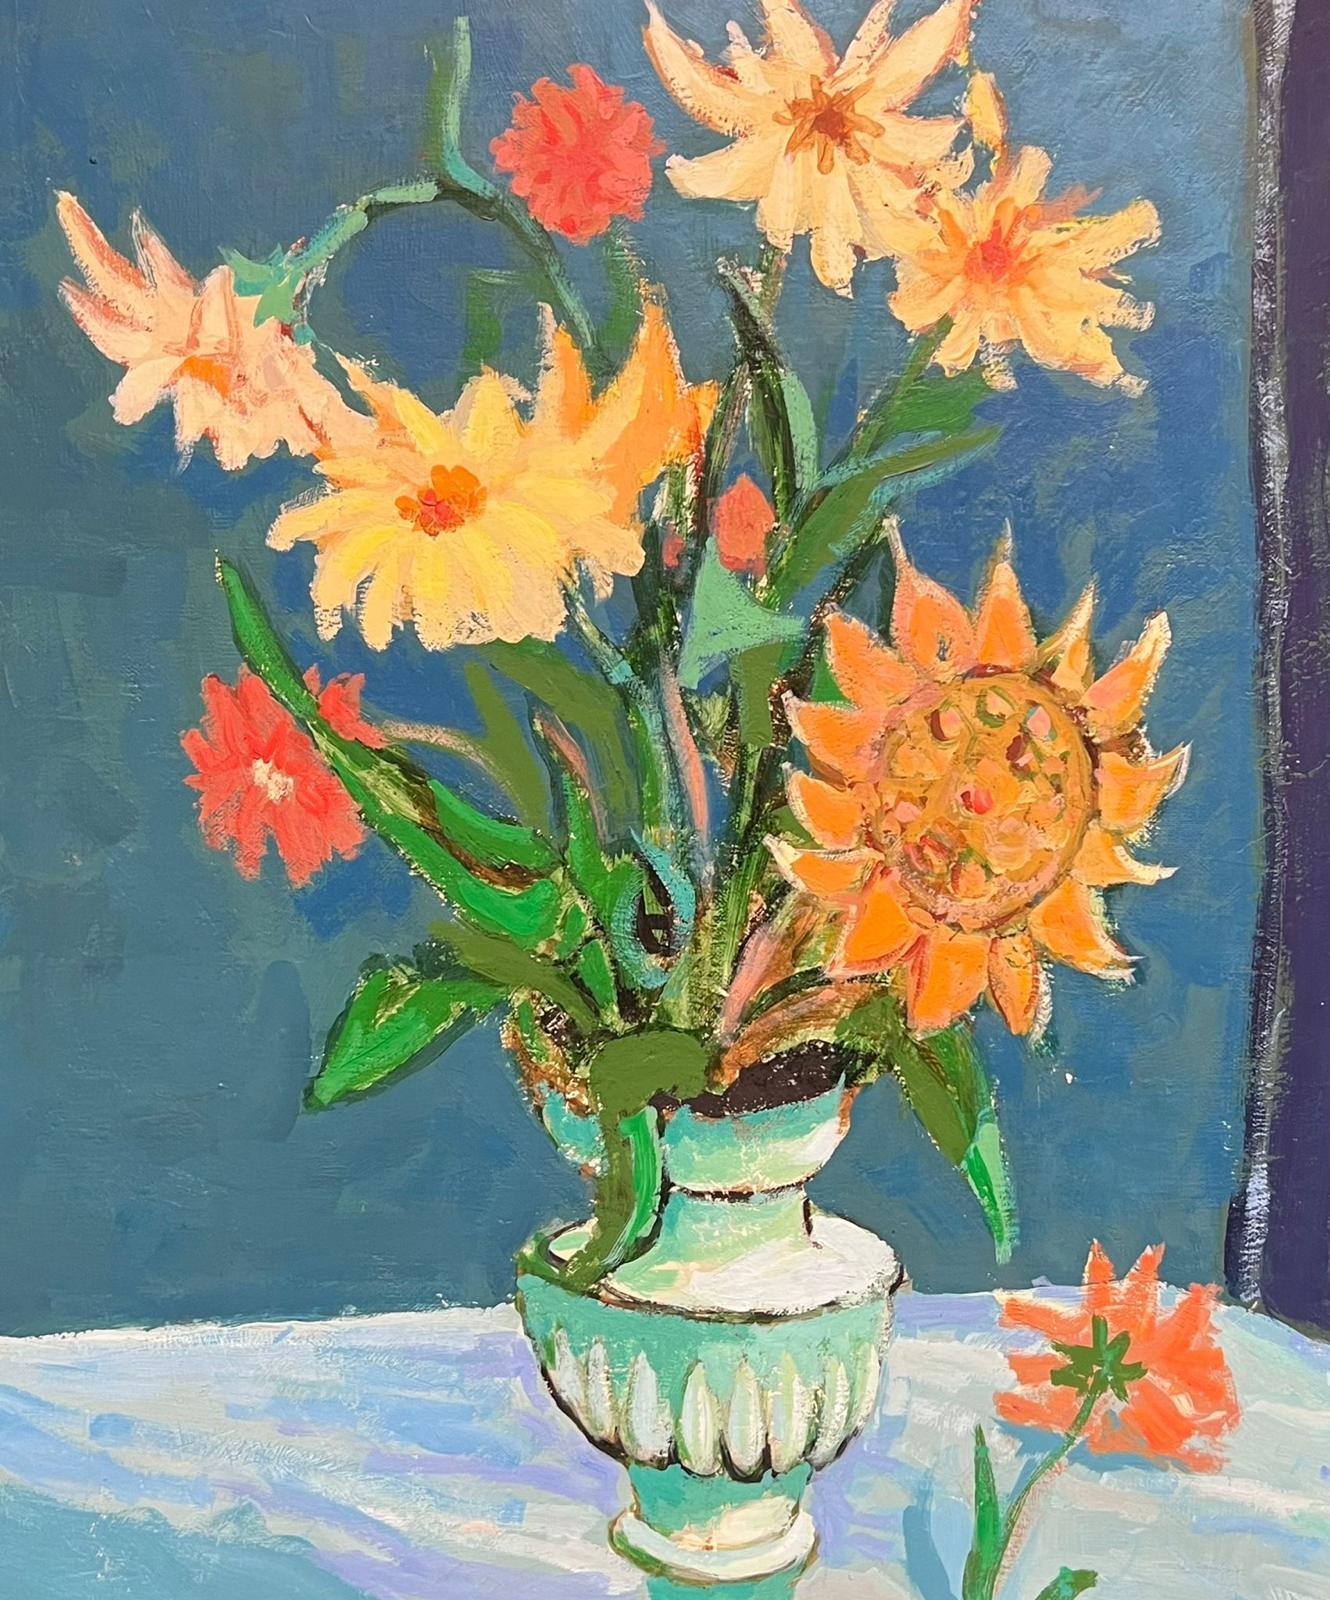 Sunflowers in the Room
by Michel Kritz (French 1925-1994) 
signed oil on canvas, framed
framed: 17.5 x 15.5 inches
canvas: 10.75 x 9 inches
provenance: private collection, France
condition: very good and sound condition  